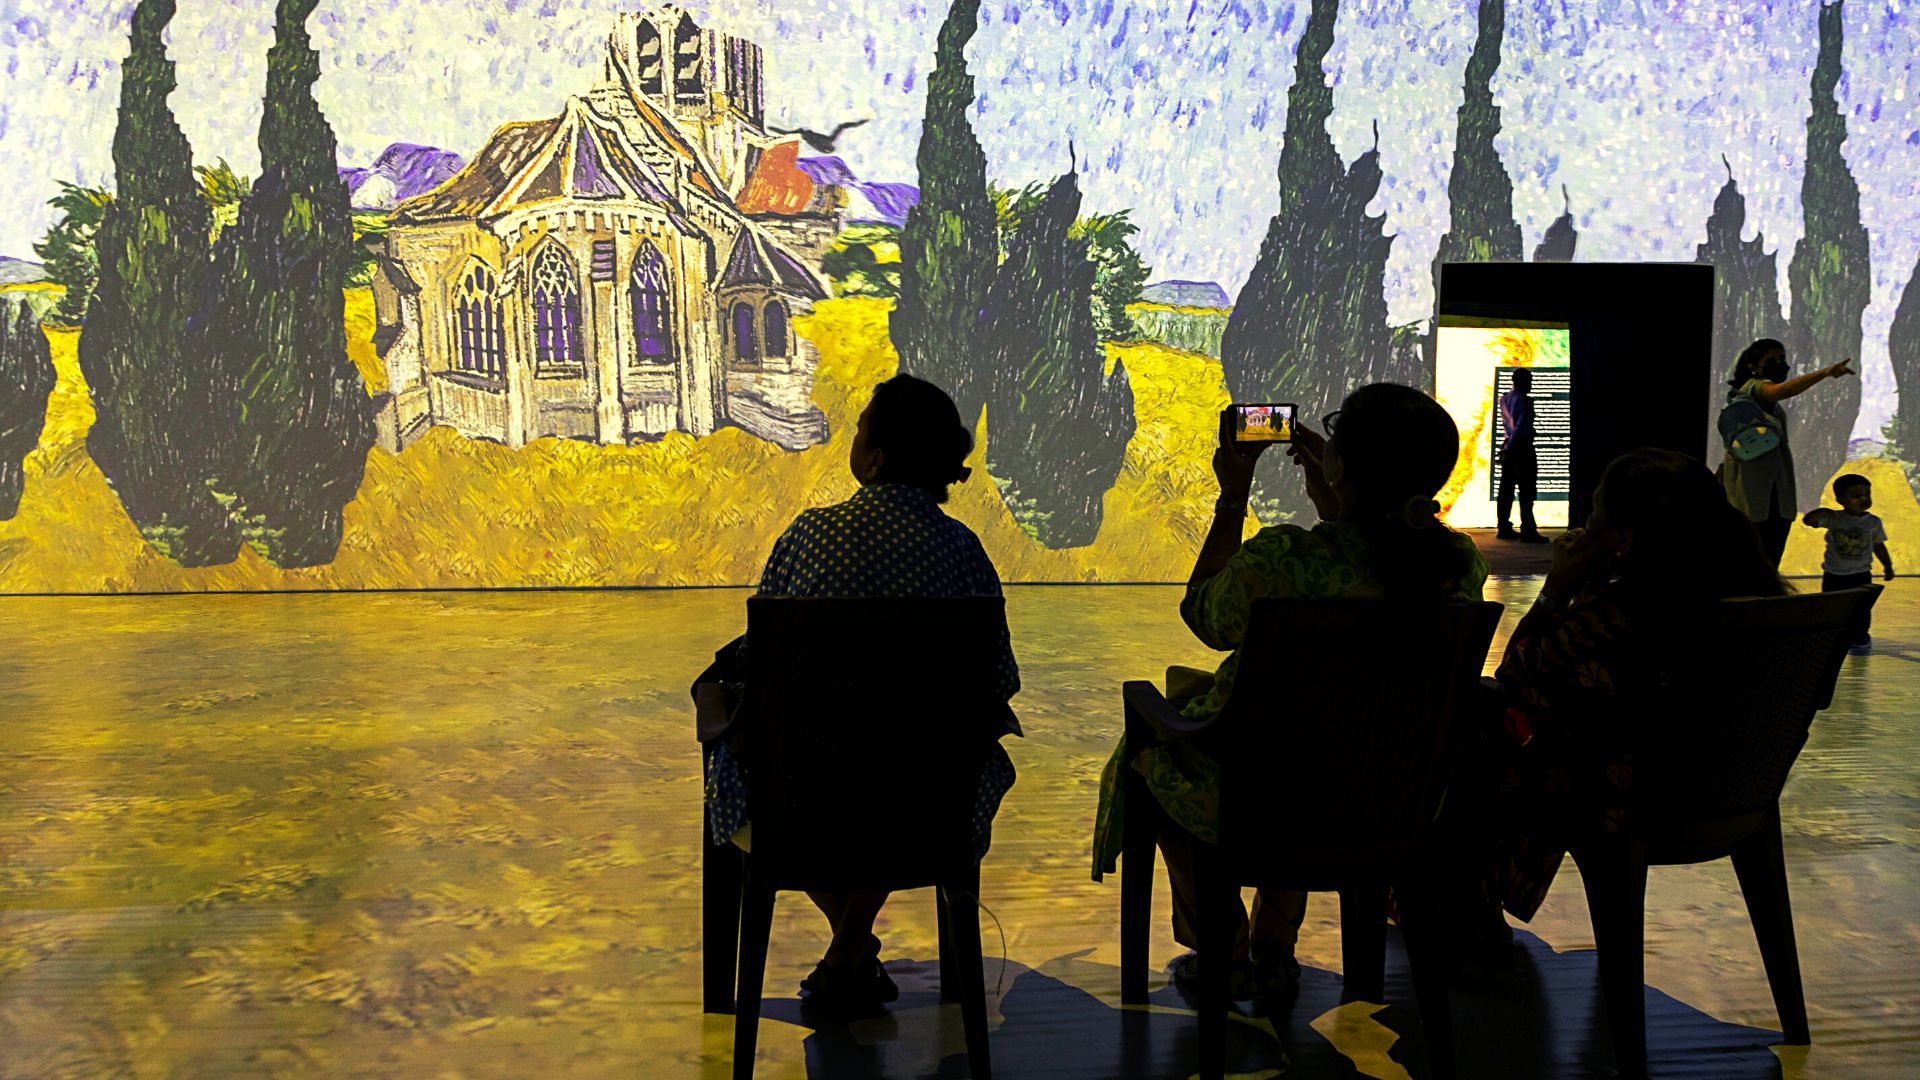 Van Gogh 360° Experience is set to debut in Delhi this April. All